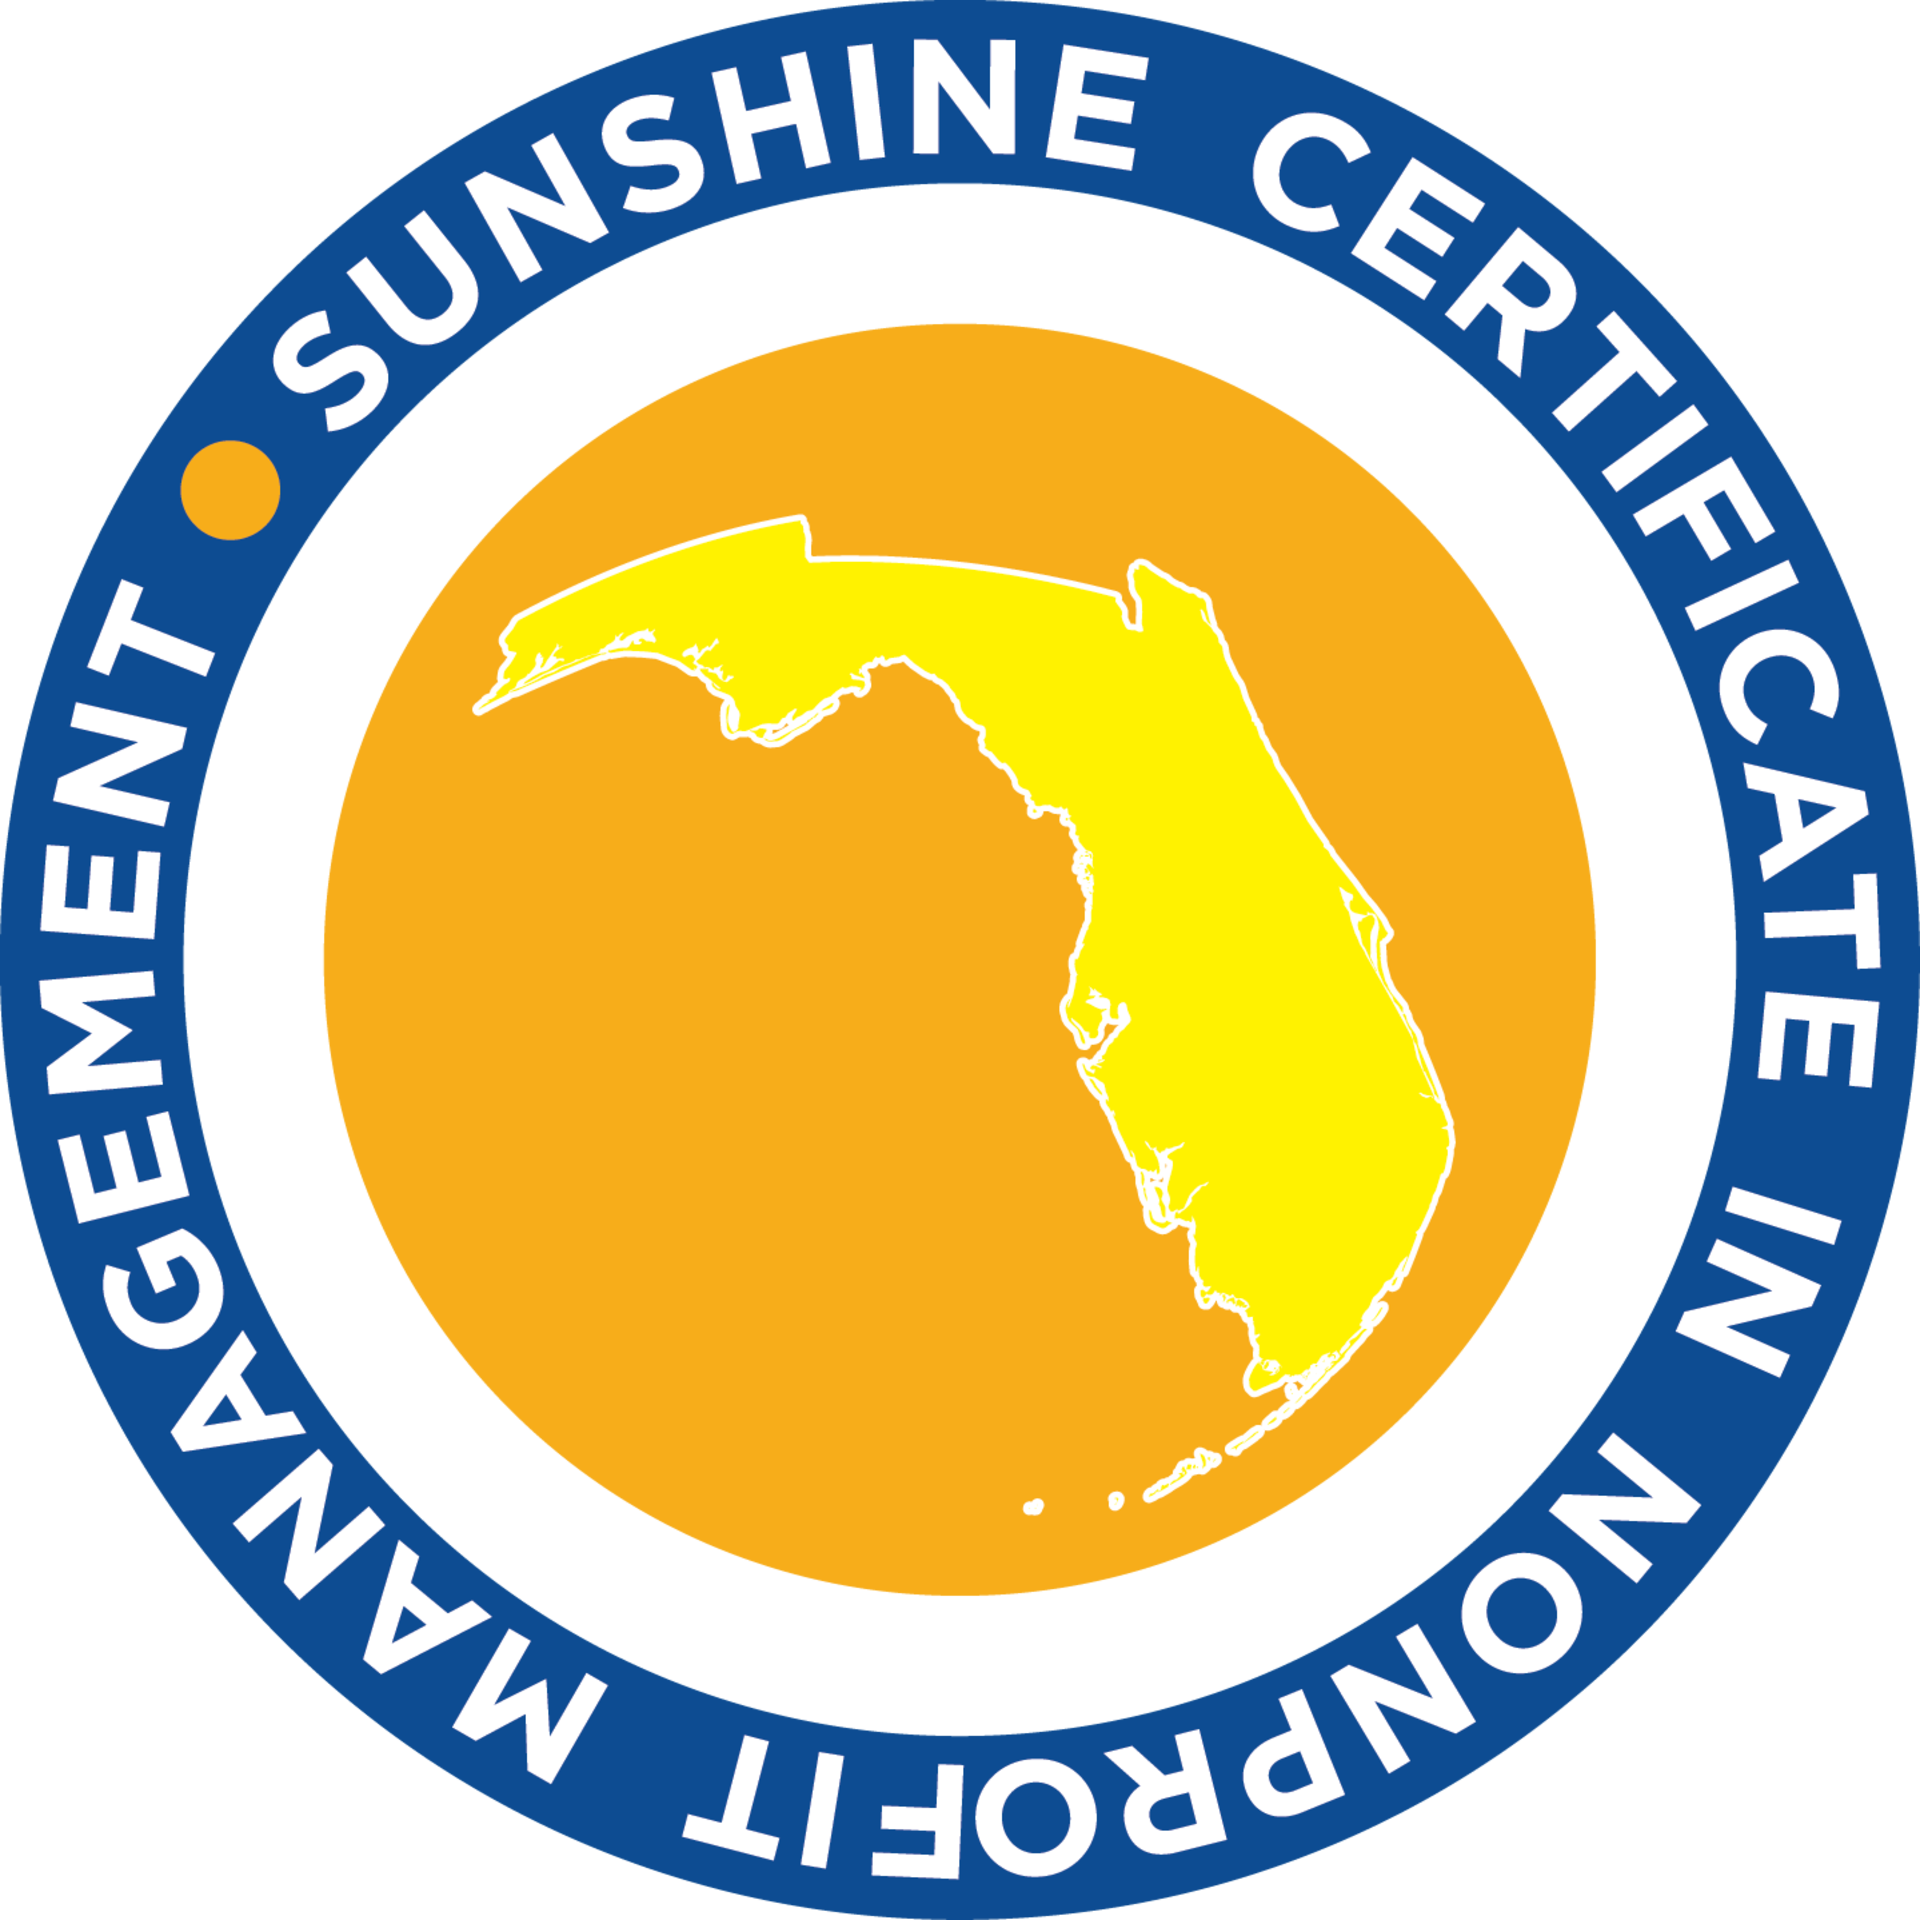  The Florida Association of Nonprofits’ Grantwriting Class of the Sunshine Certificate in...